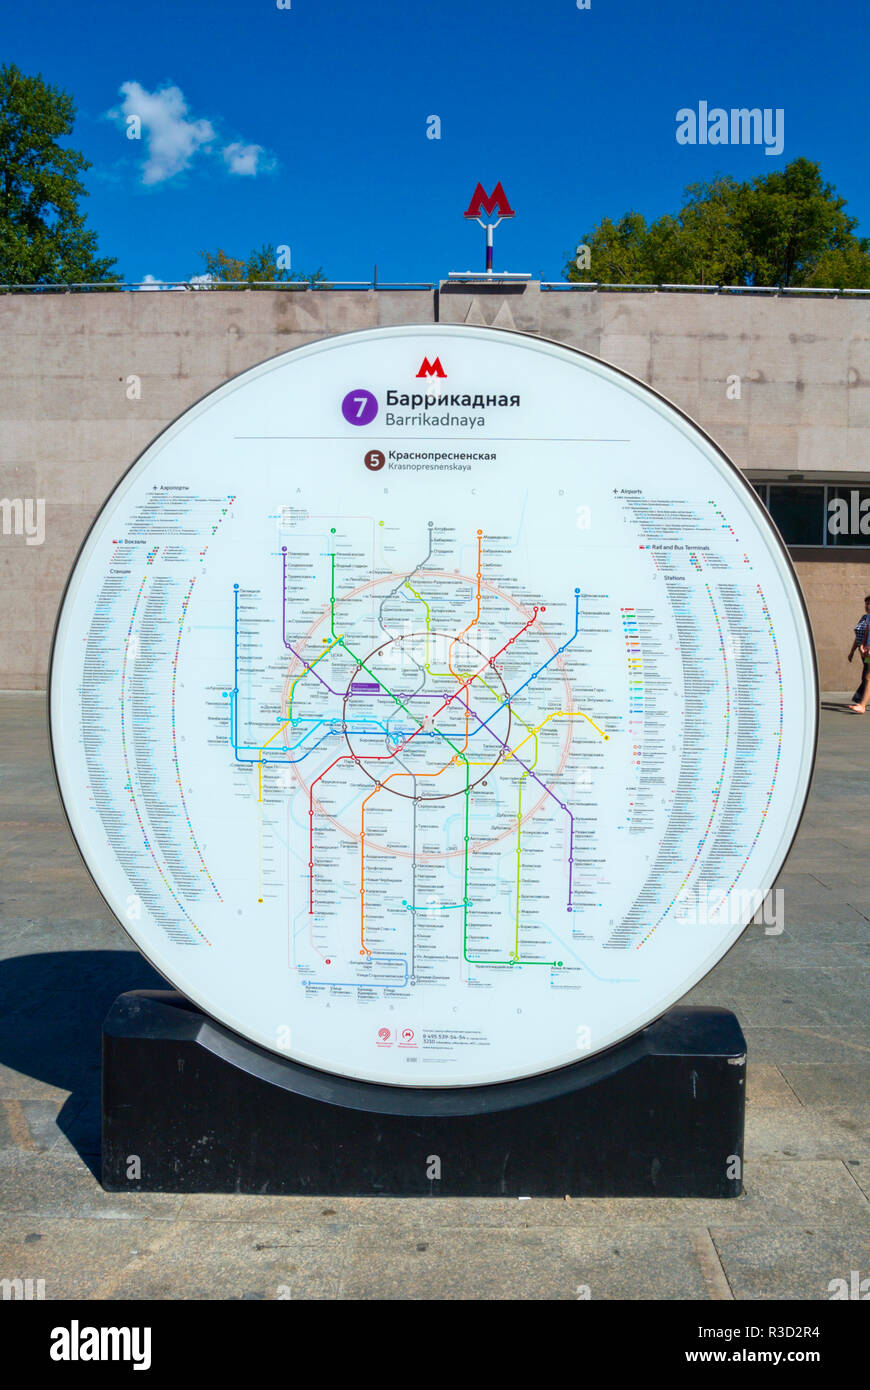 Typical metro network map, outside Barrikadnaya metro station, Moscow, Russia Stock Photo